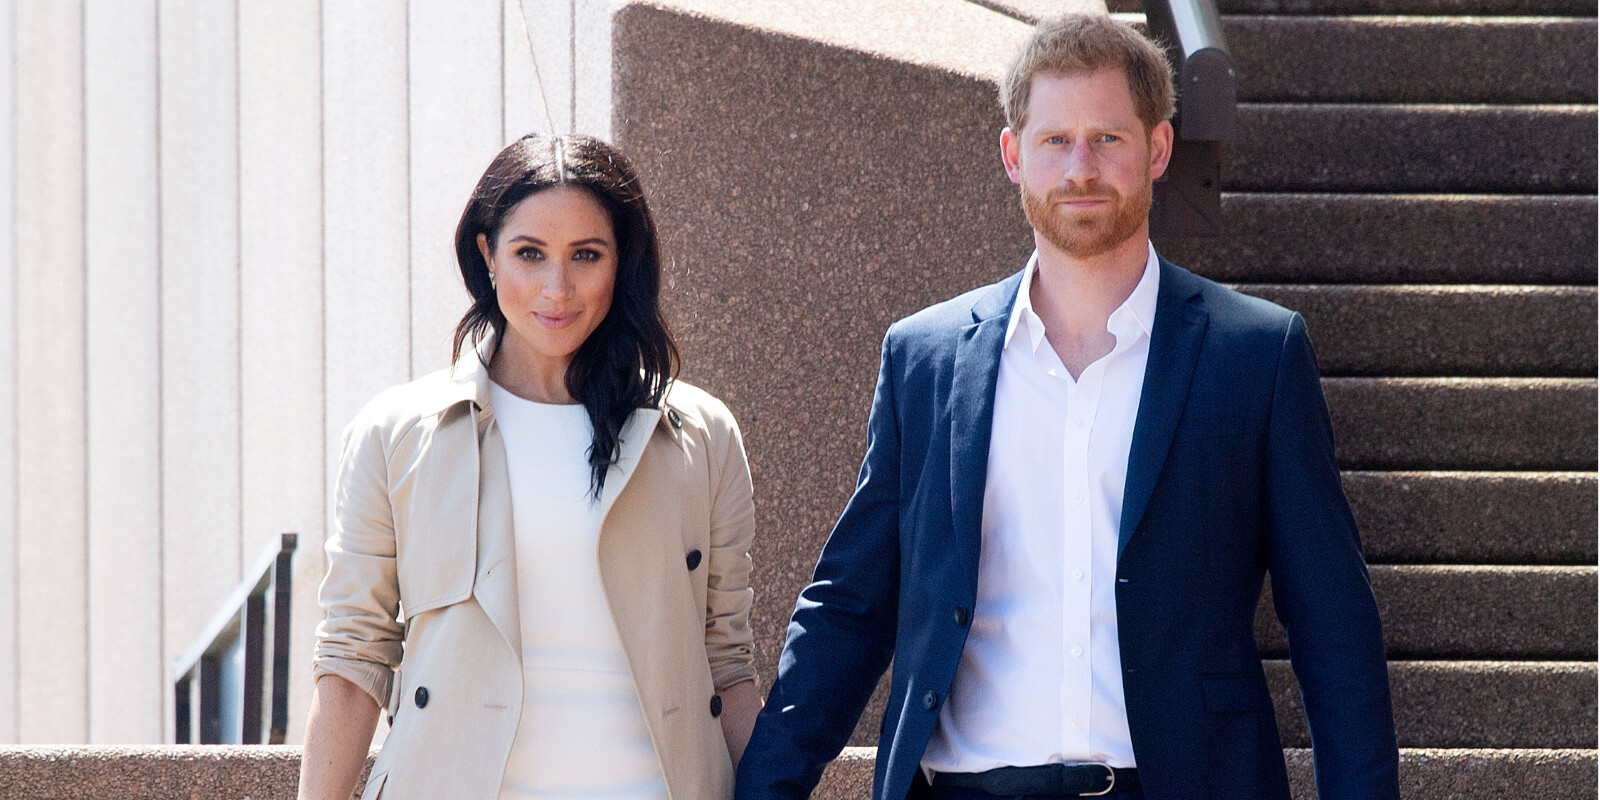 Meghan Markle and Prince Harry will not attend King Charles' coronation together.